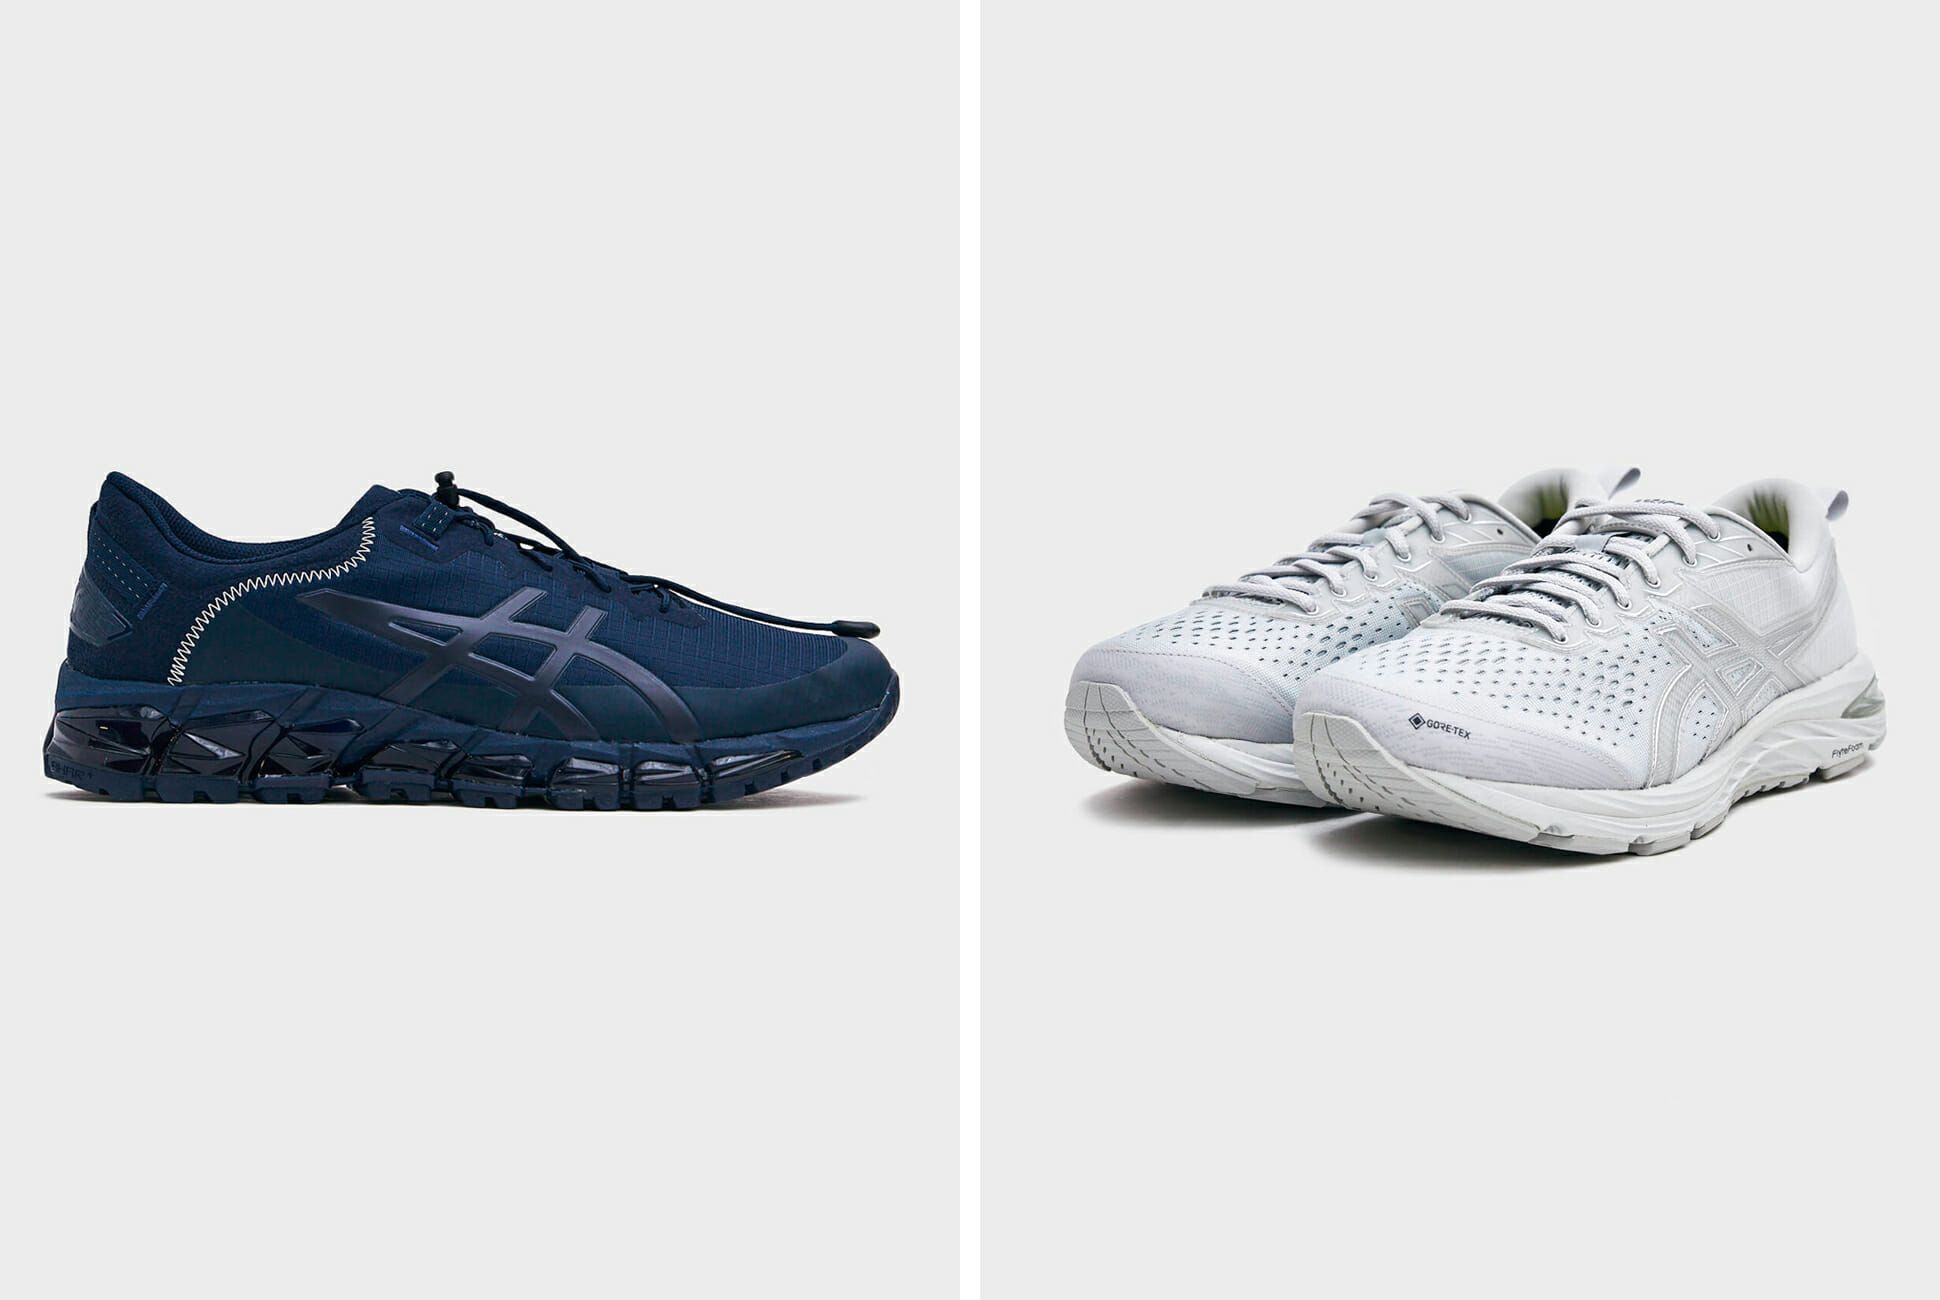 These ASICS x Reinging Champ Sneakers 